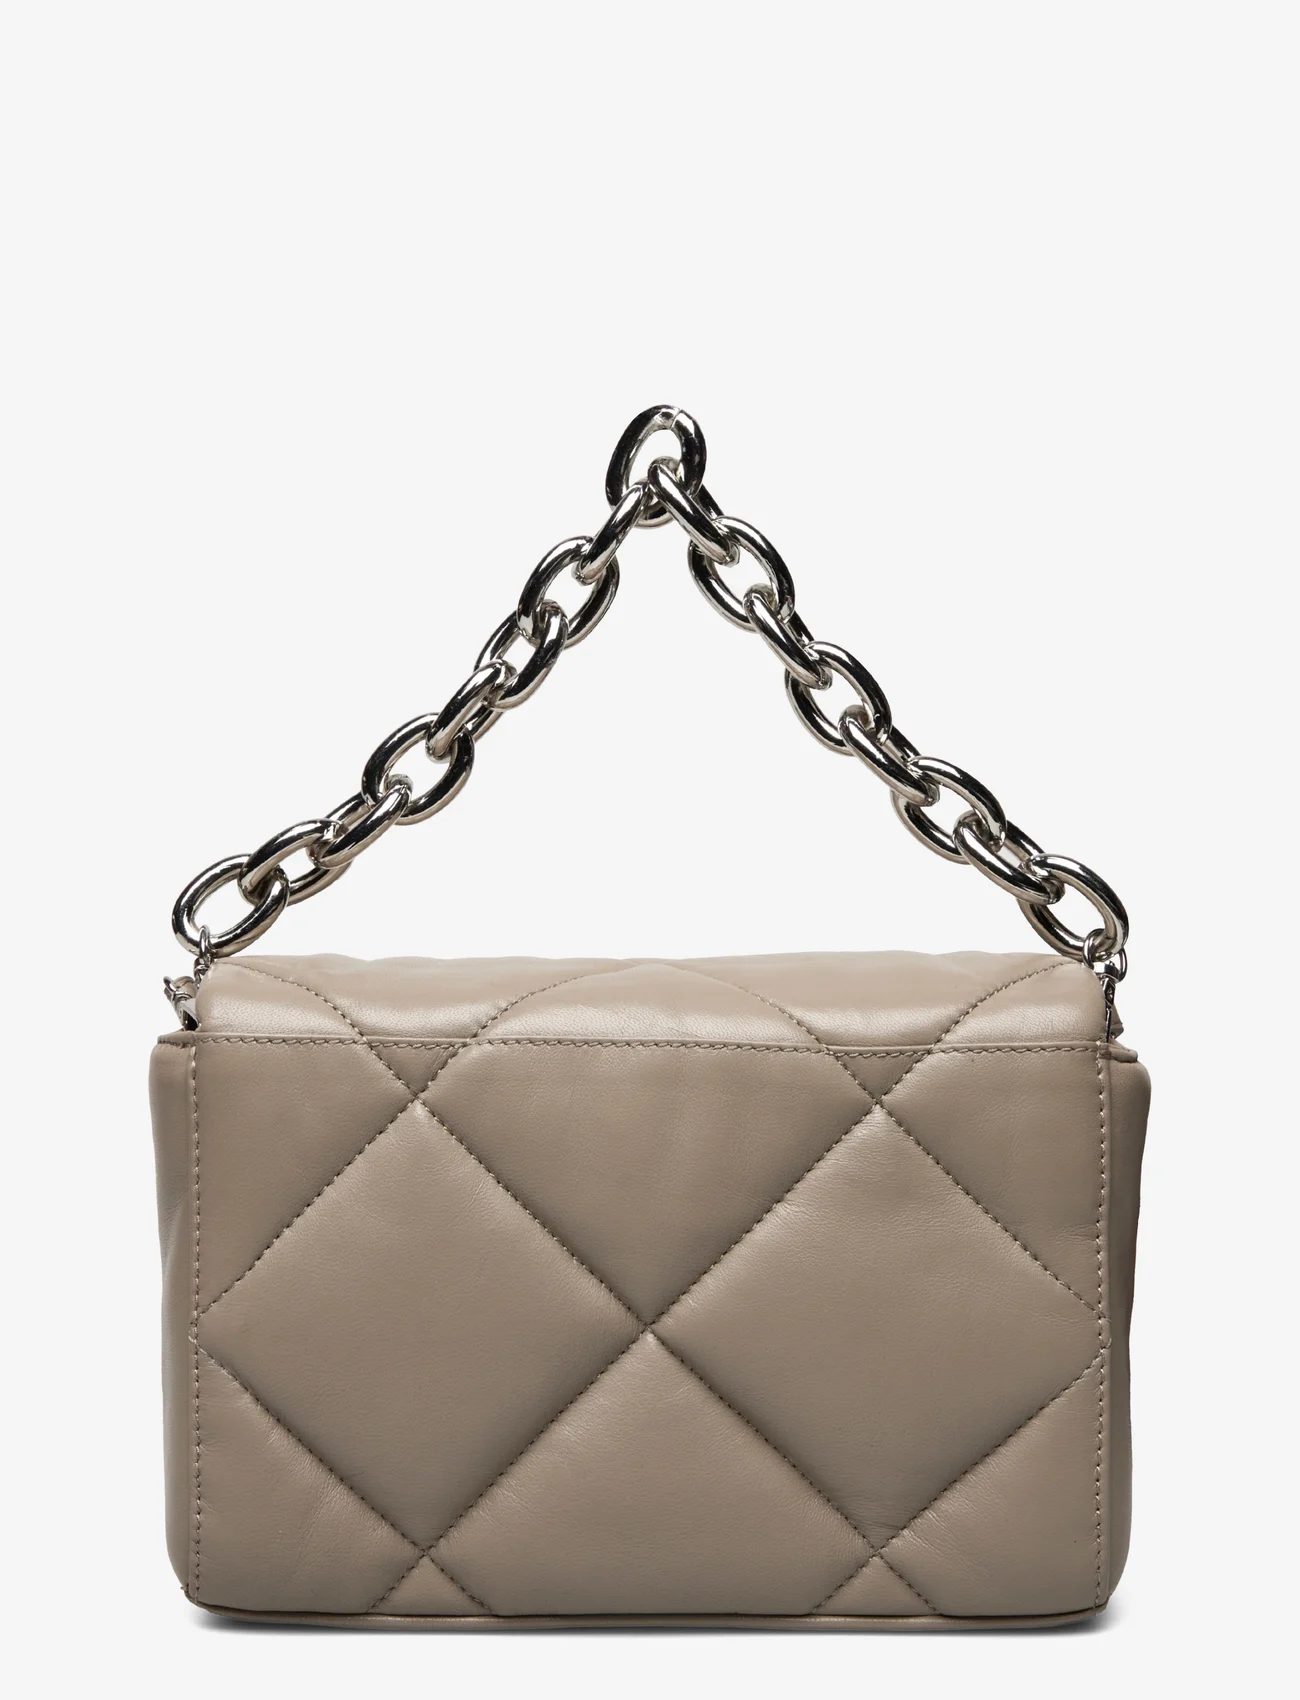 Stand Studio - Brynn Chain Bag - party wear at outlet prices - sandstone beige/silver - 1